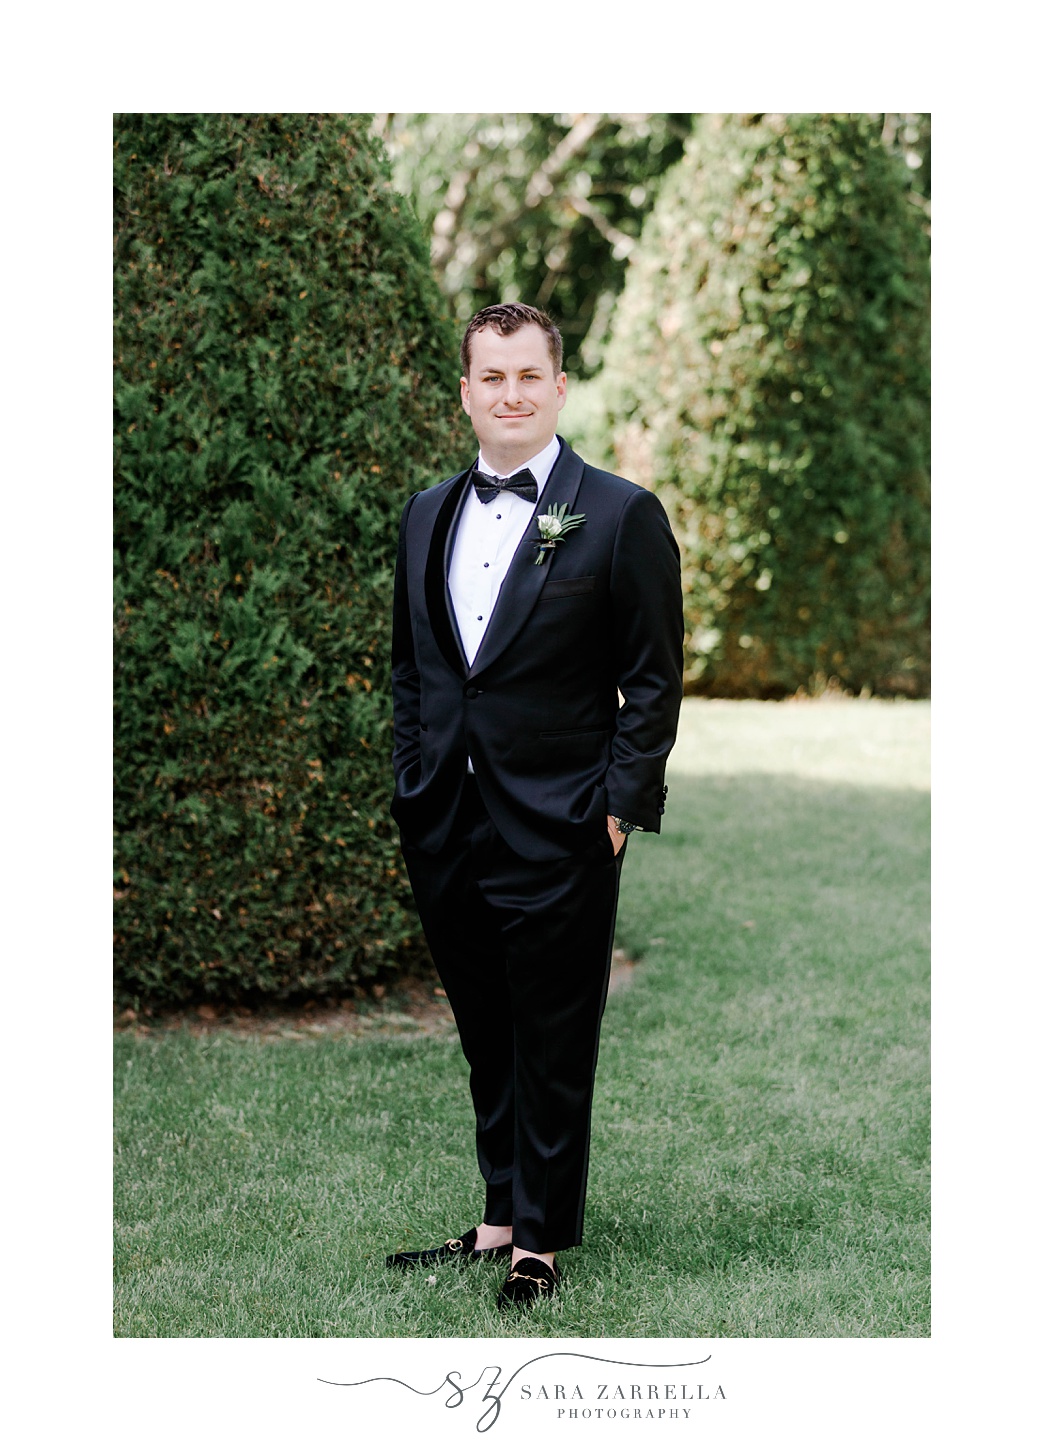 groom in black suit stands with hands in pockets